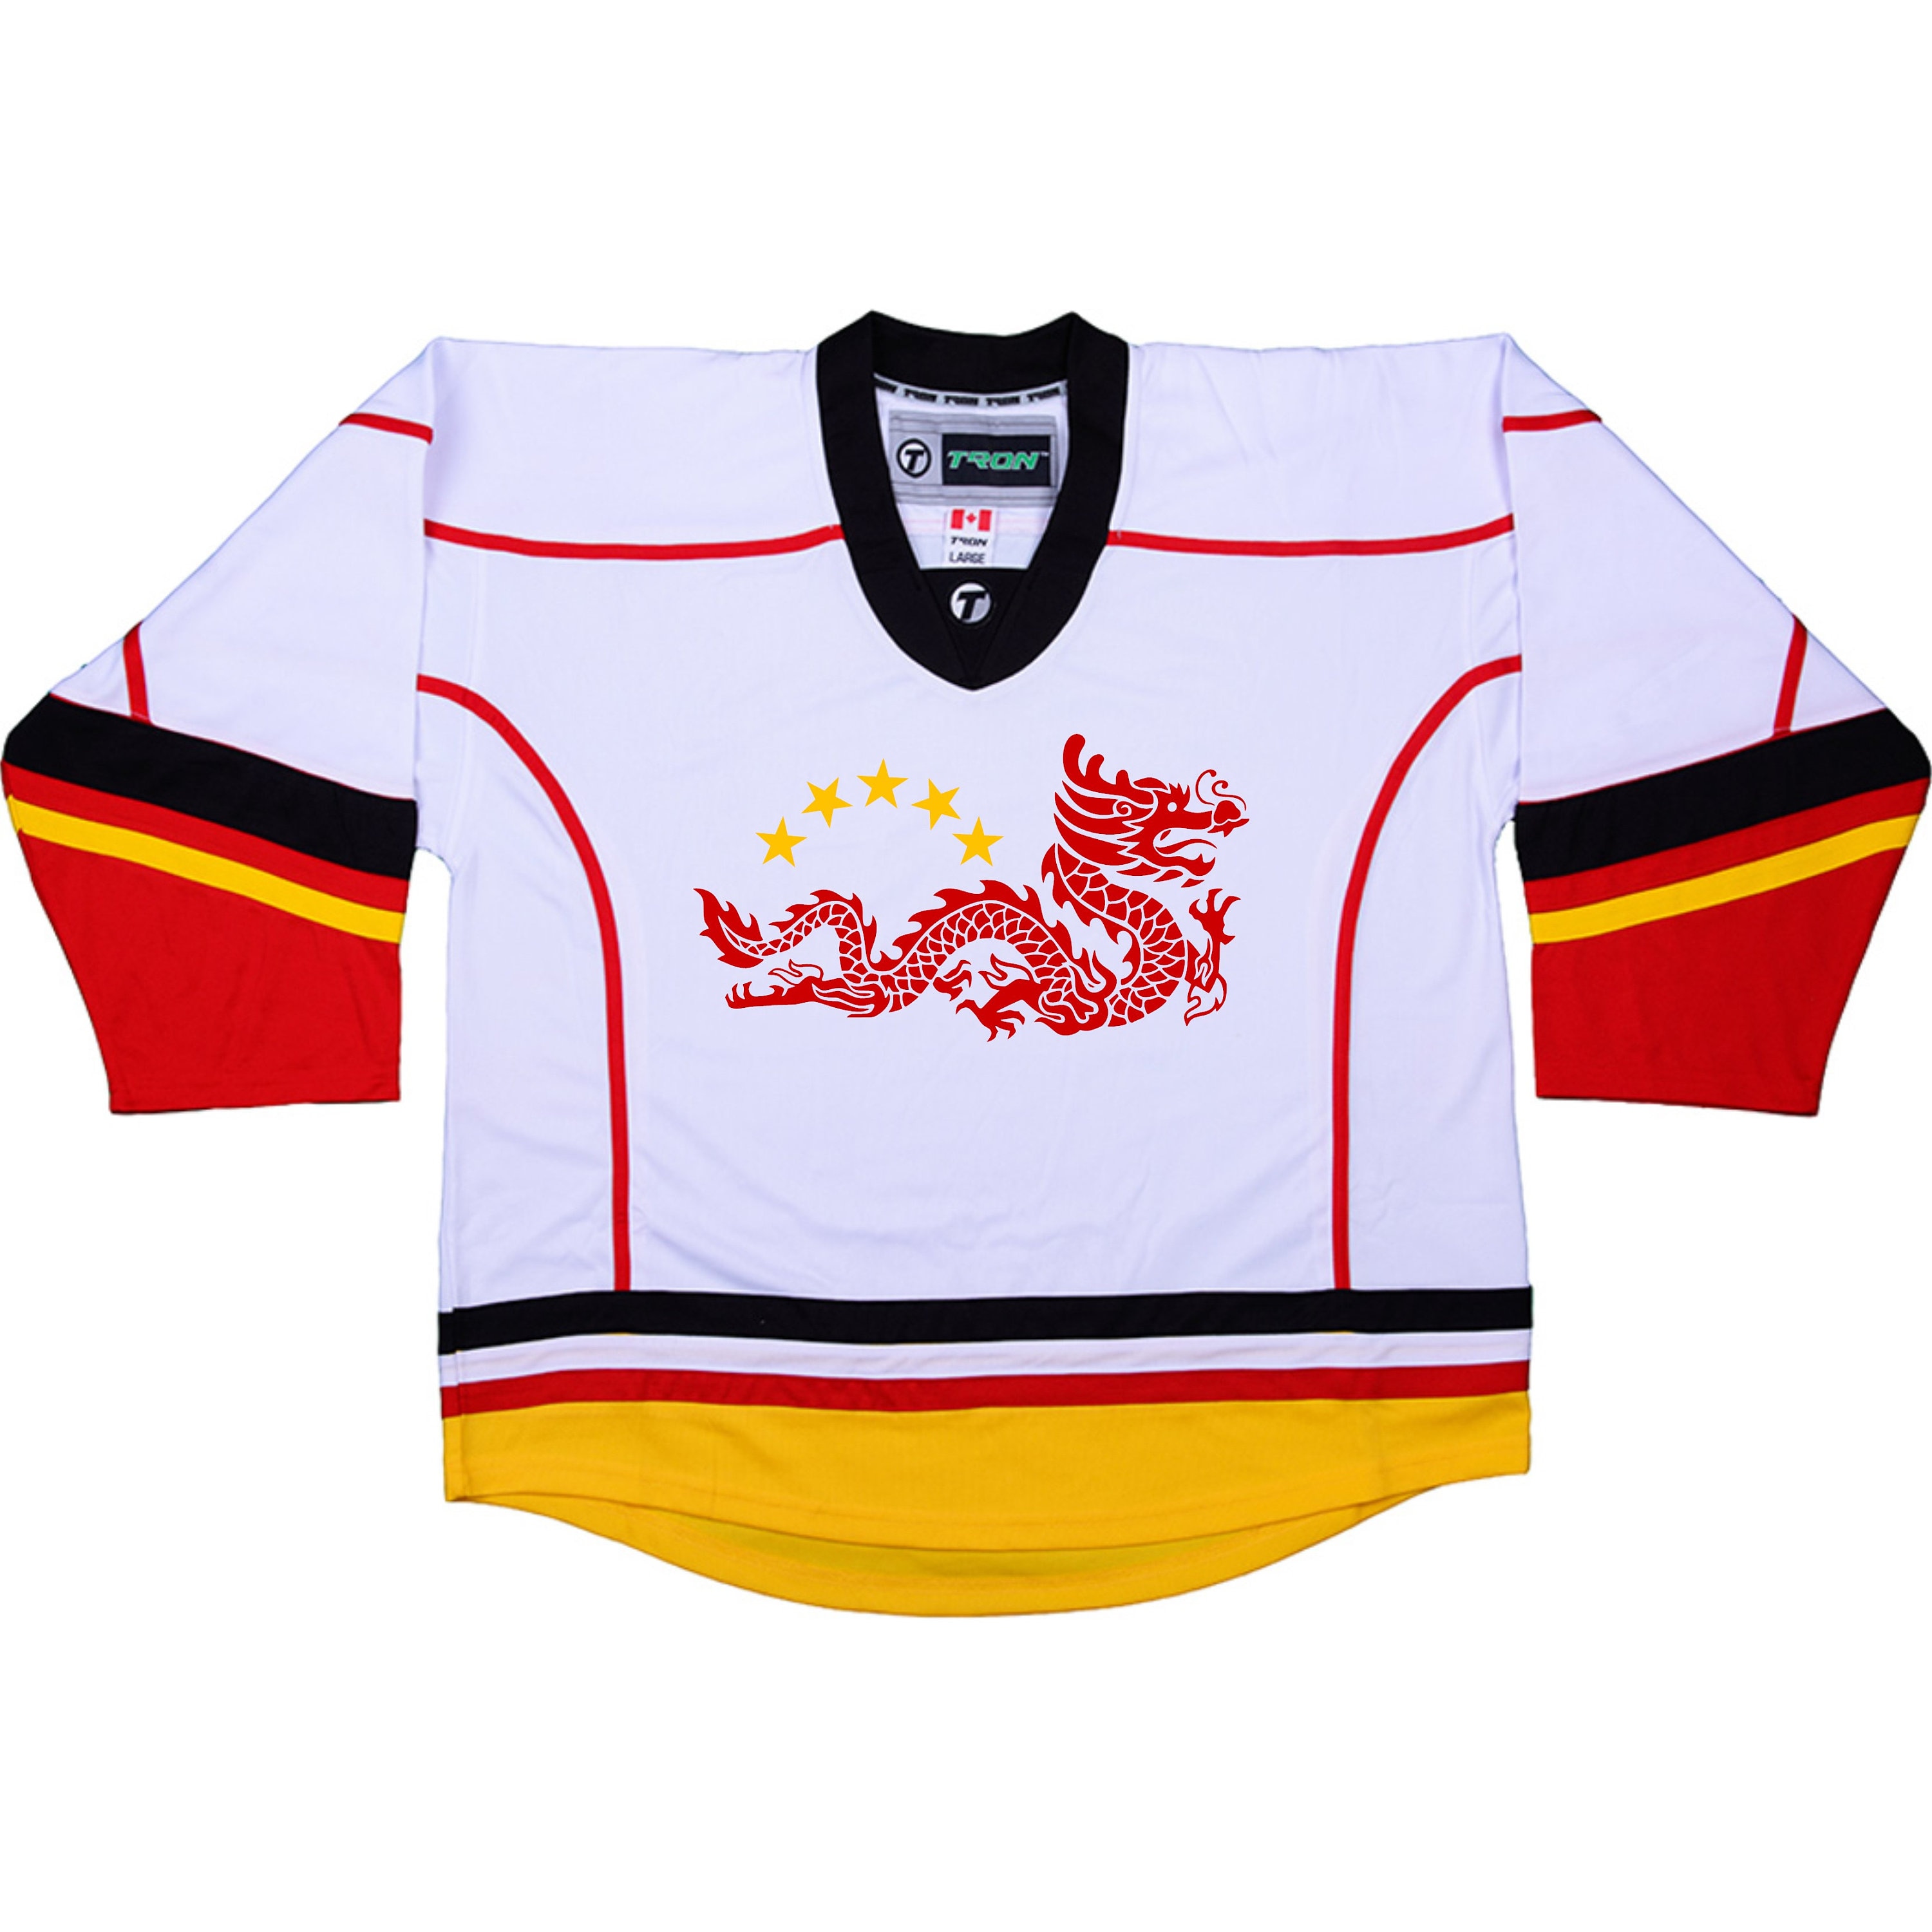 What is the one jersey you want but haven't been able to find? :  r/hockeyjerseys